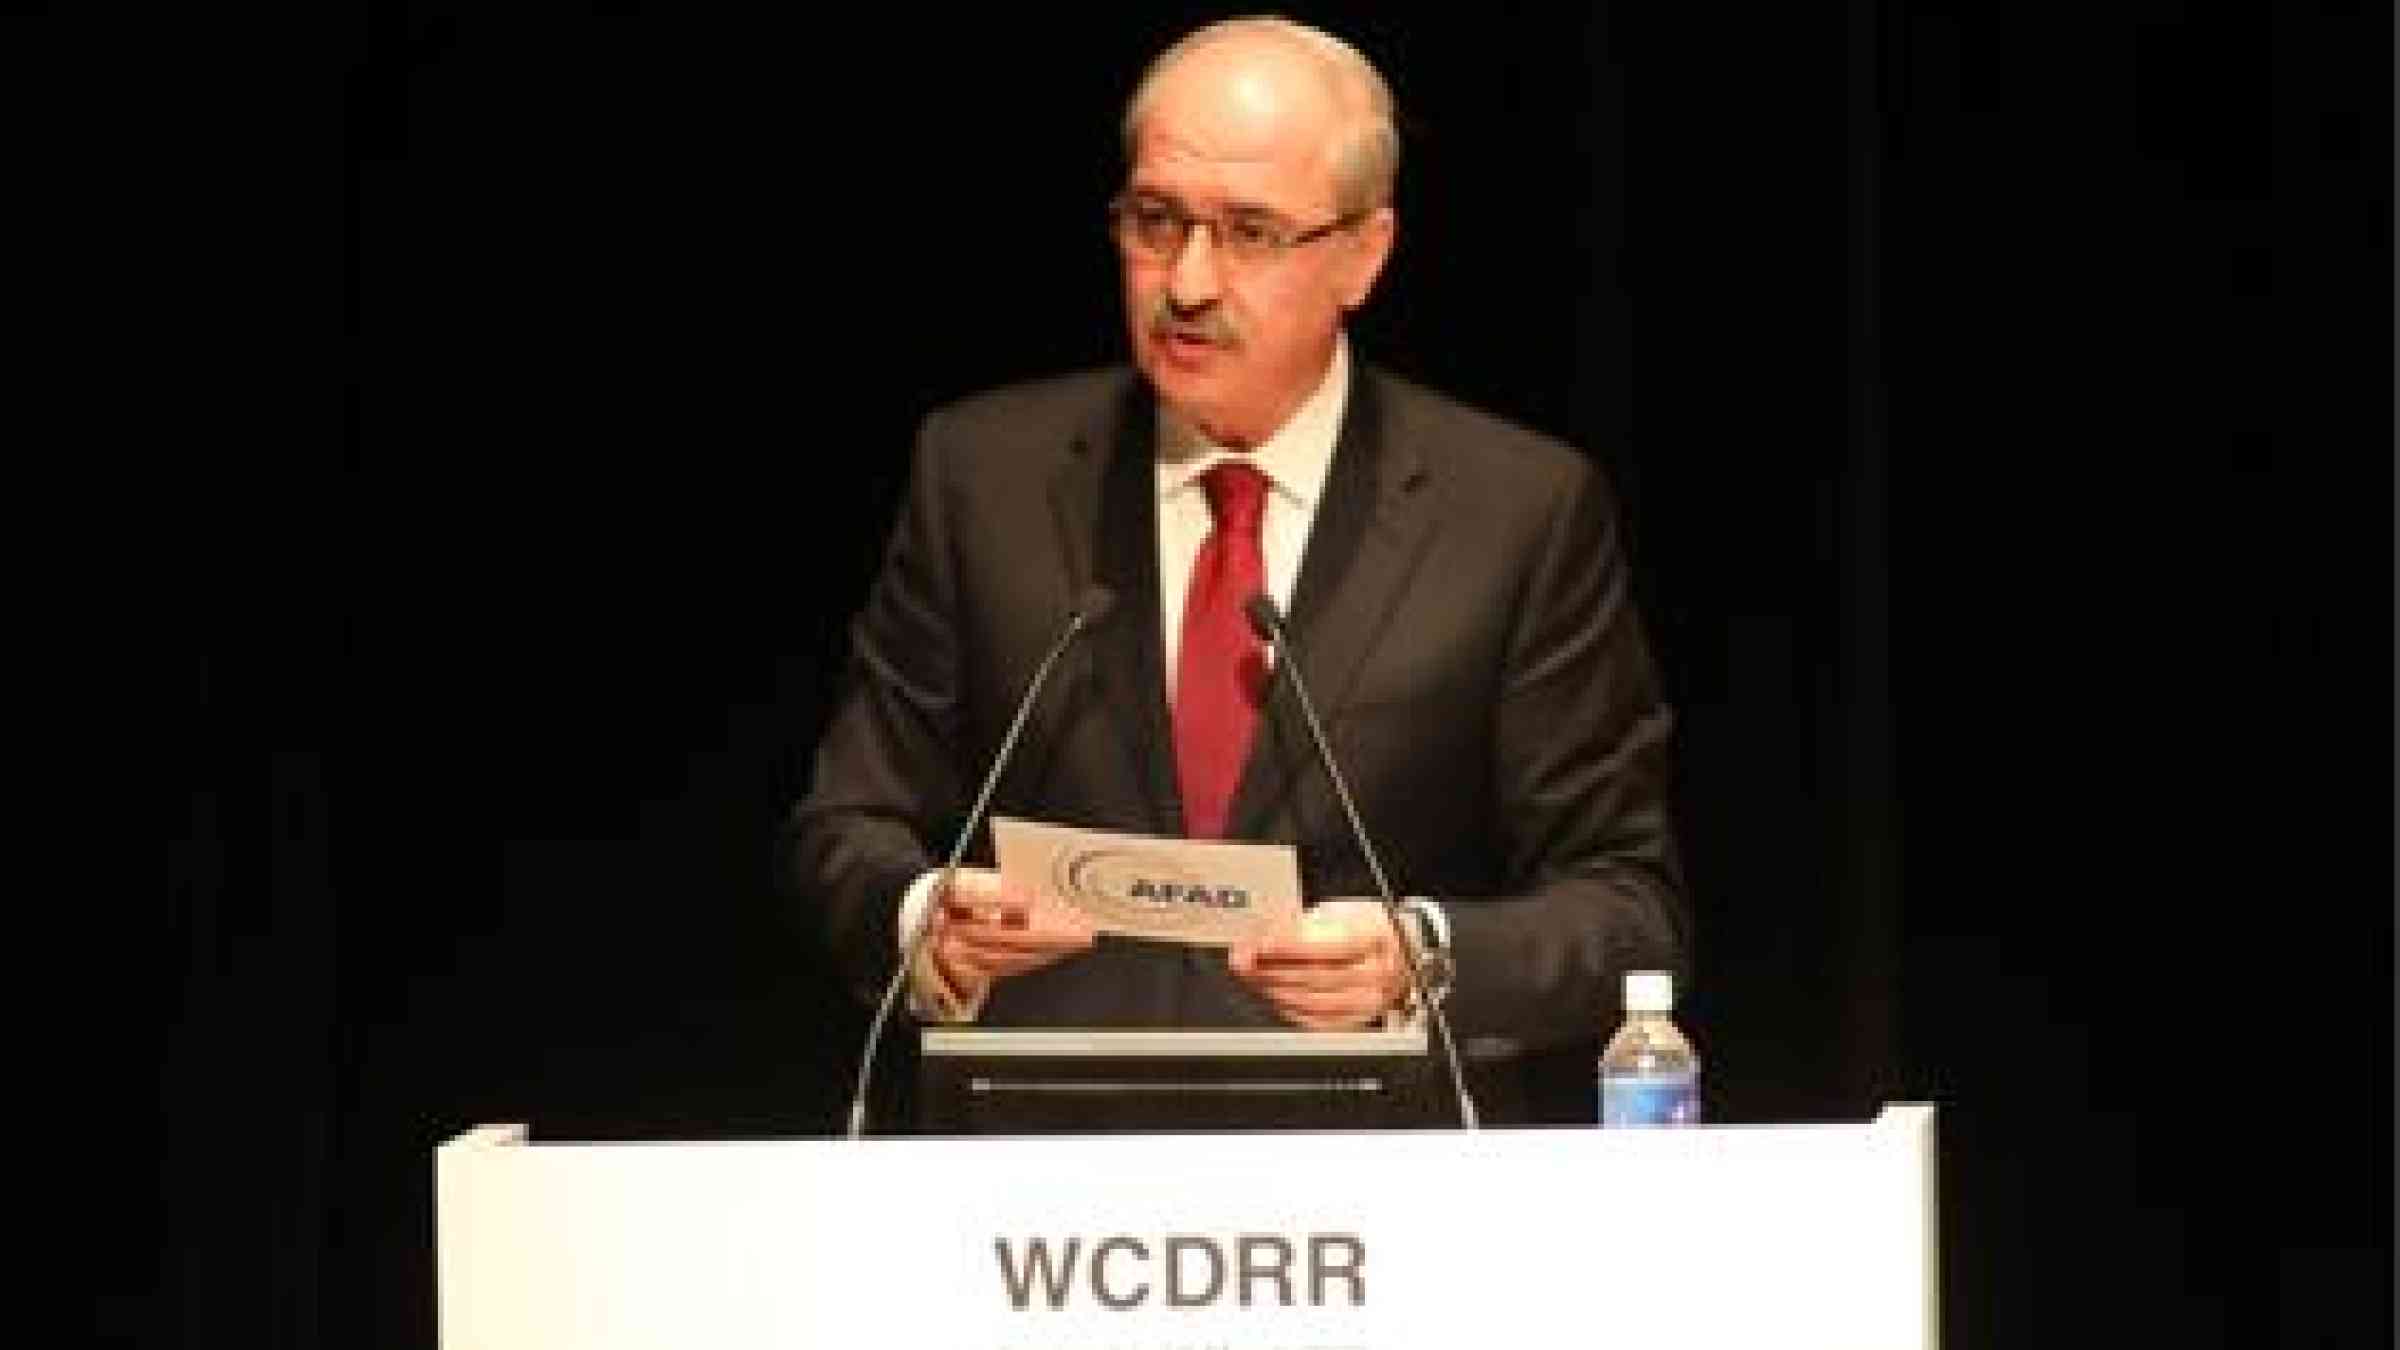 Turkey’s Deputy Prime Minister Numan Kurtulmus speaks at the launch of the Worldwide Initiative on Safe Schools, during the World Conference on Disaster Risk Reduction. (Photo: UNISDR)